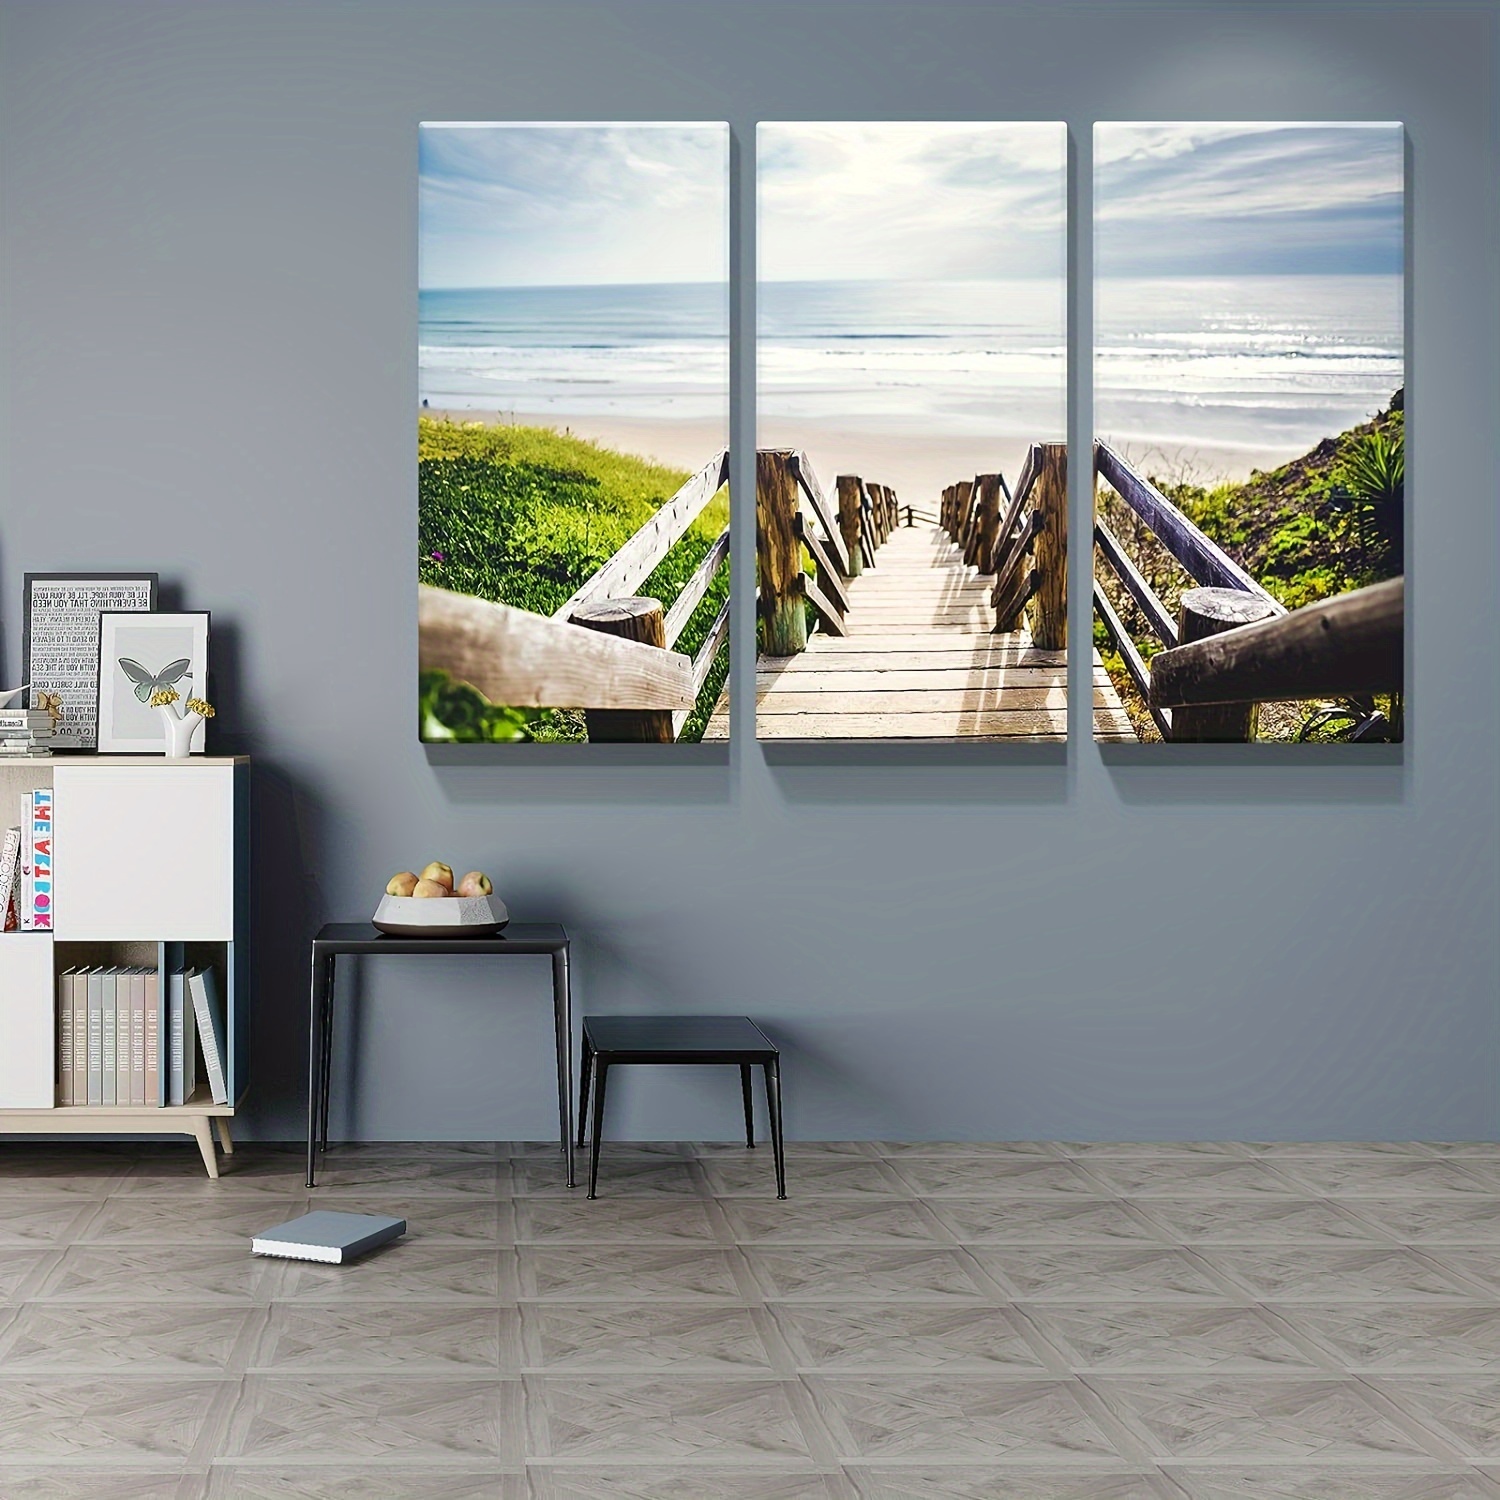 Beachside Wooden Path Wall Art: Bridge Boardwalk Stair Graphic Art on Wrapped Canvas for Wall Decor (18''x24'')